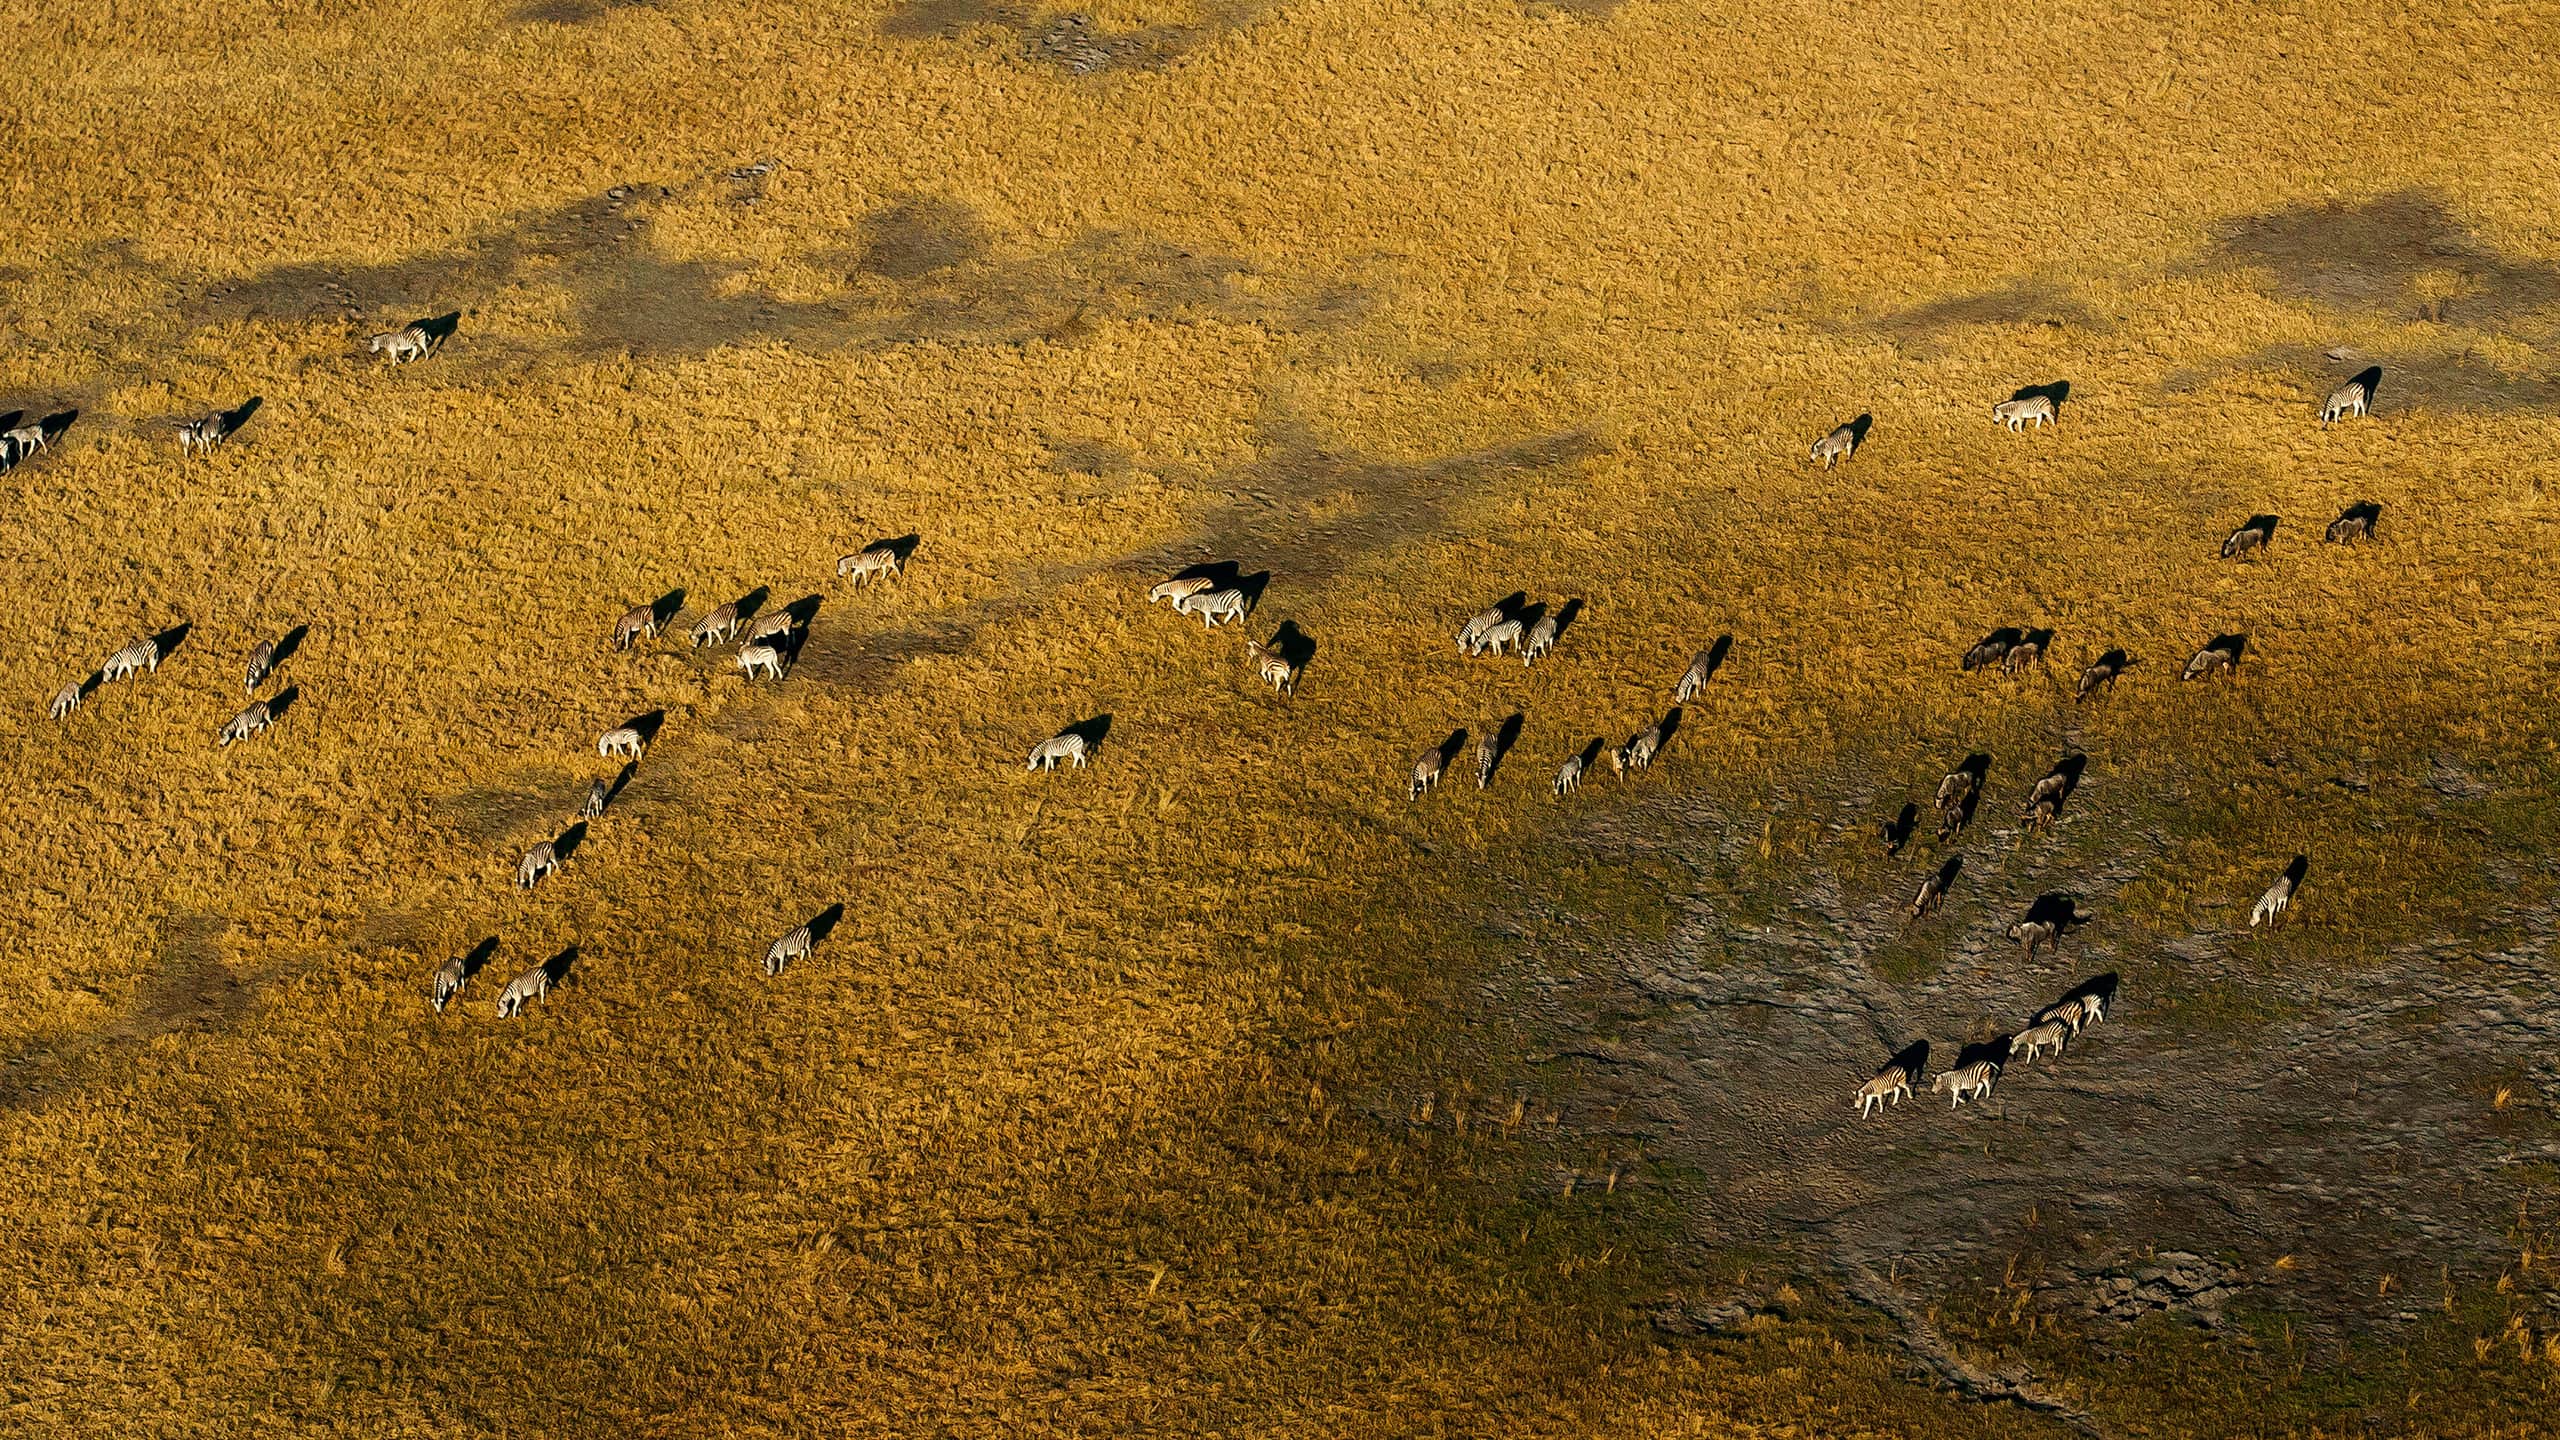 Aerial View of Zebras